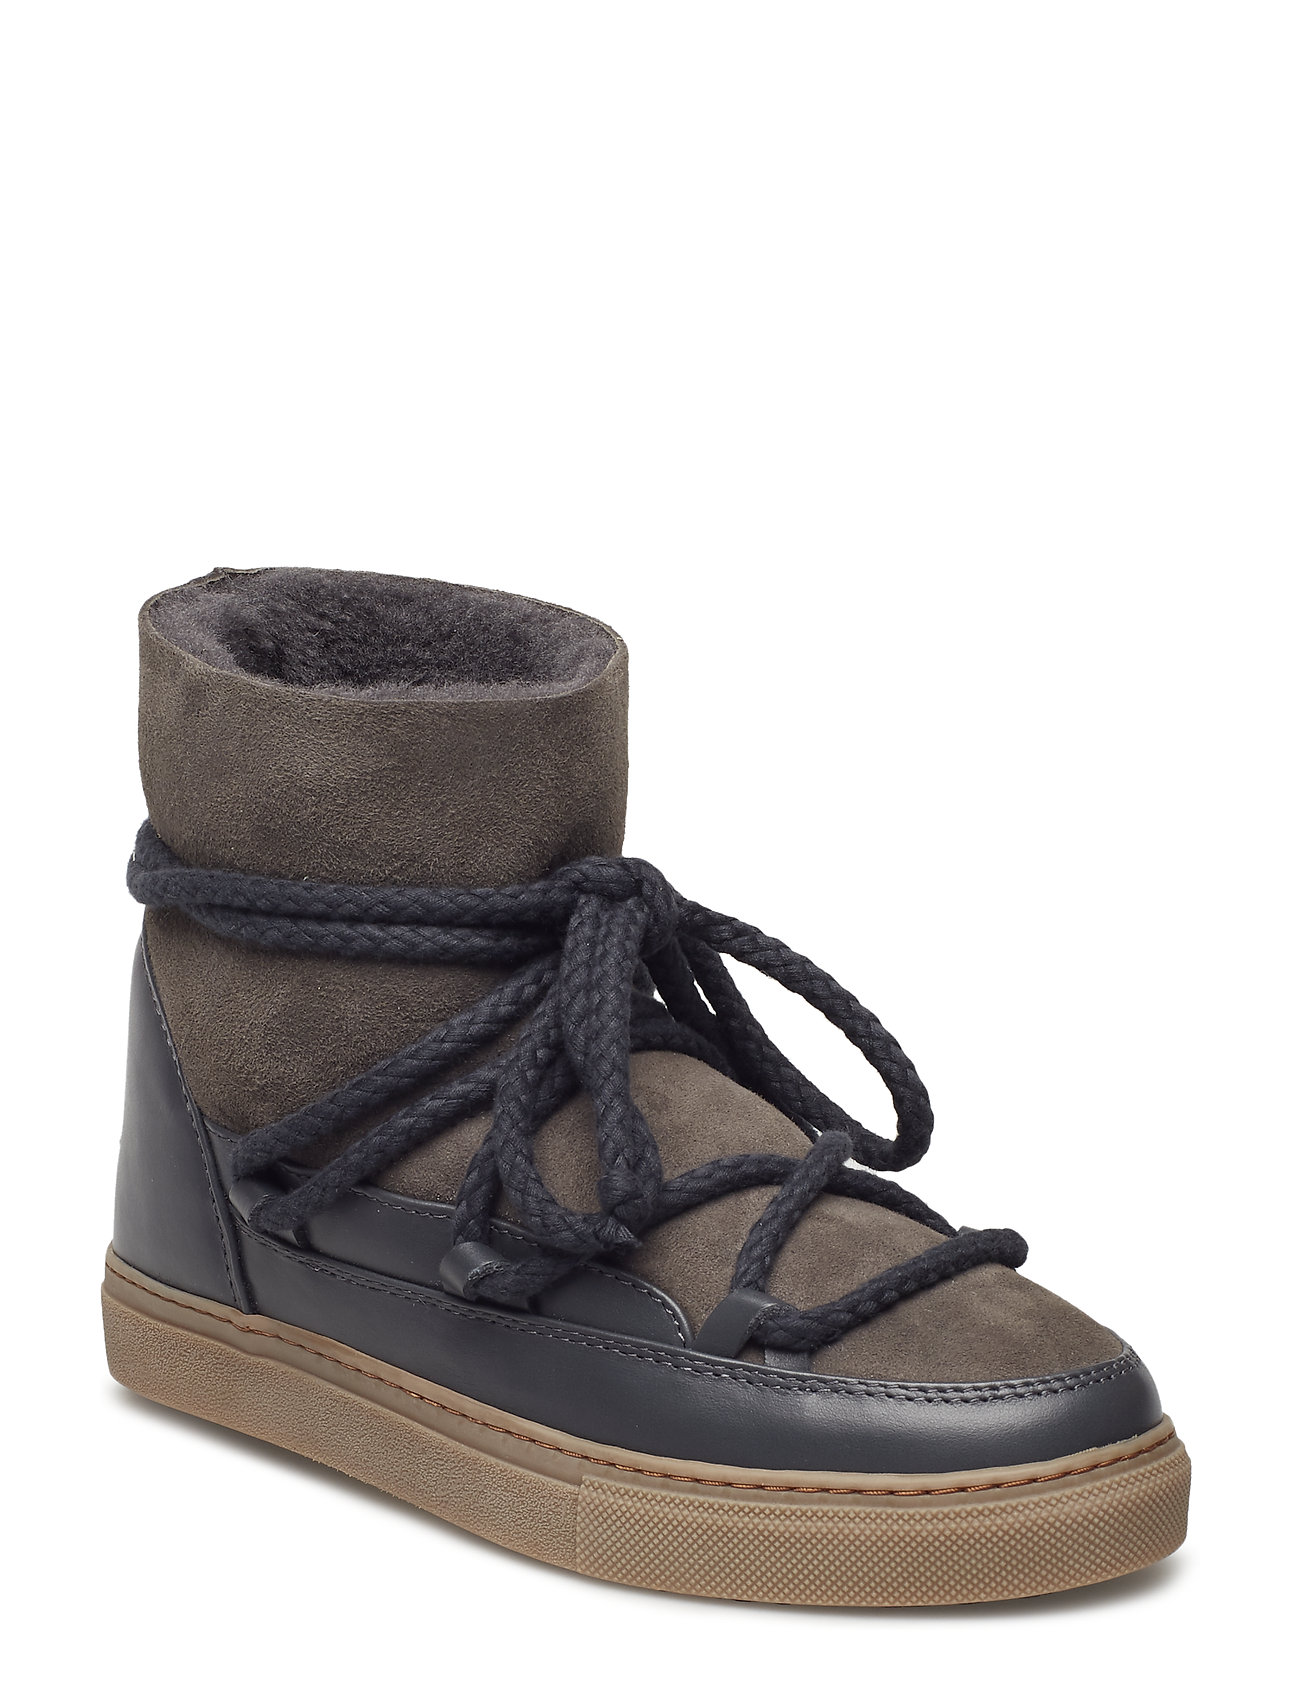 Sneaker Classic Shoes Boots Ankle Boots Ankle Boot - Flat Grå Inuikii